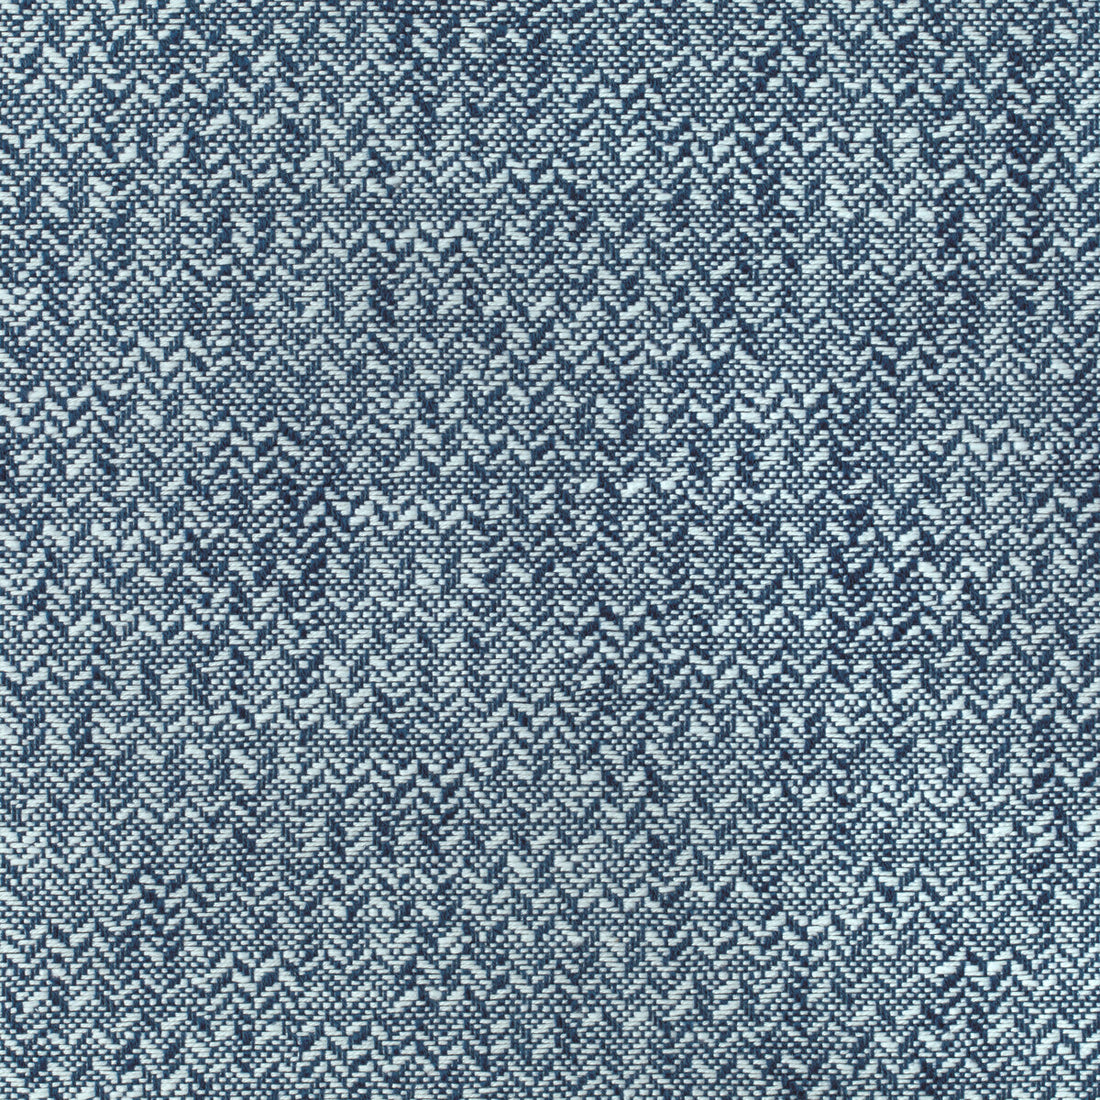 Kravet Design fabric in 36089-5 color - pattern 36089.5.0 - by Kravet Design in the Inside Out Performance Fabrics collection